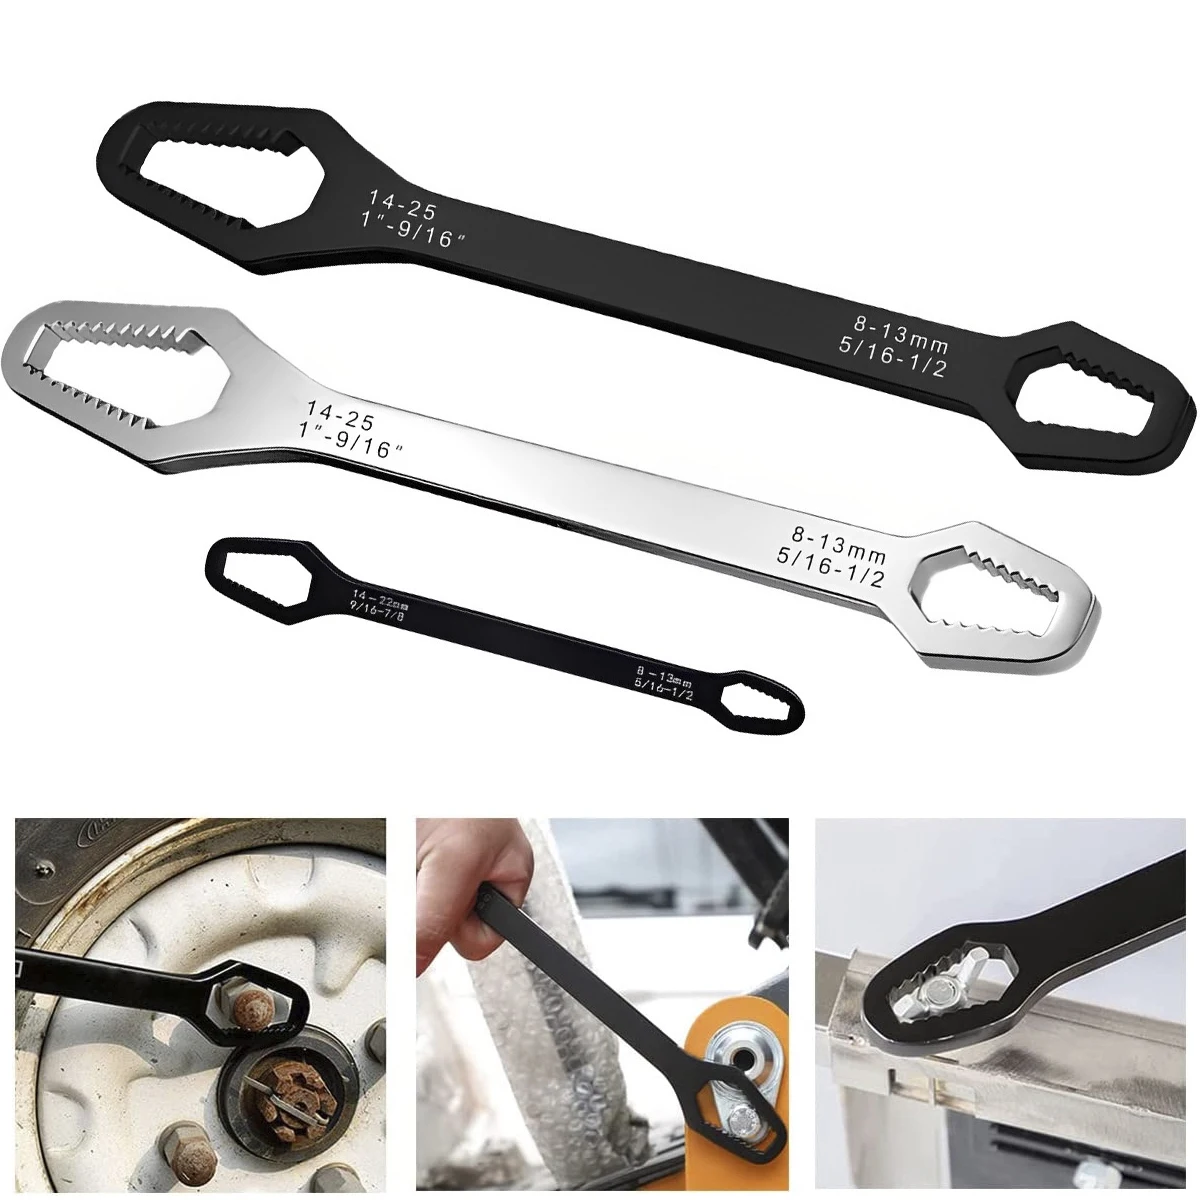 

3Pcs Double-Head Torx Wrench 5/16inch-7/8inch Multi-Purpose Self-Tightening Spanner 8mm-25mm Universal Wrench Repair Tool